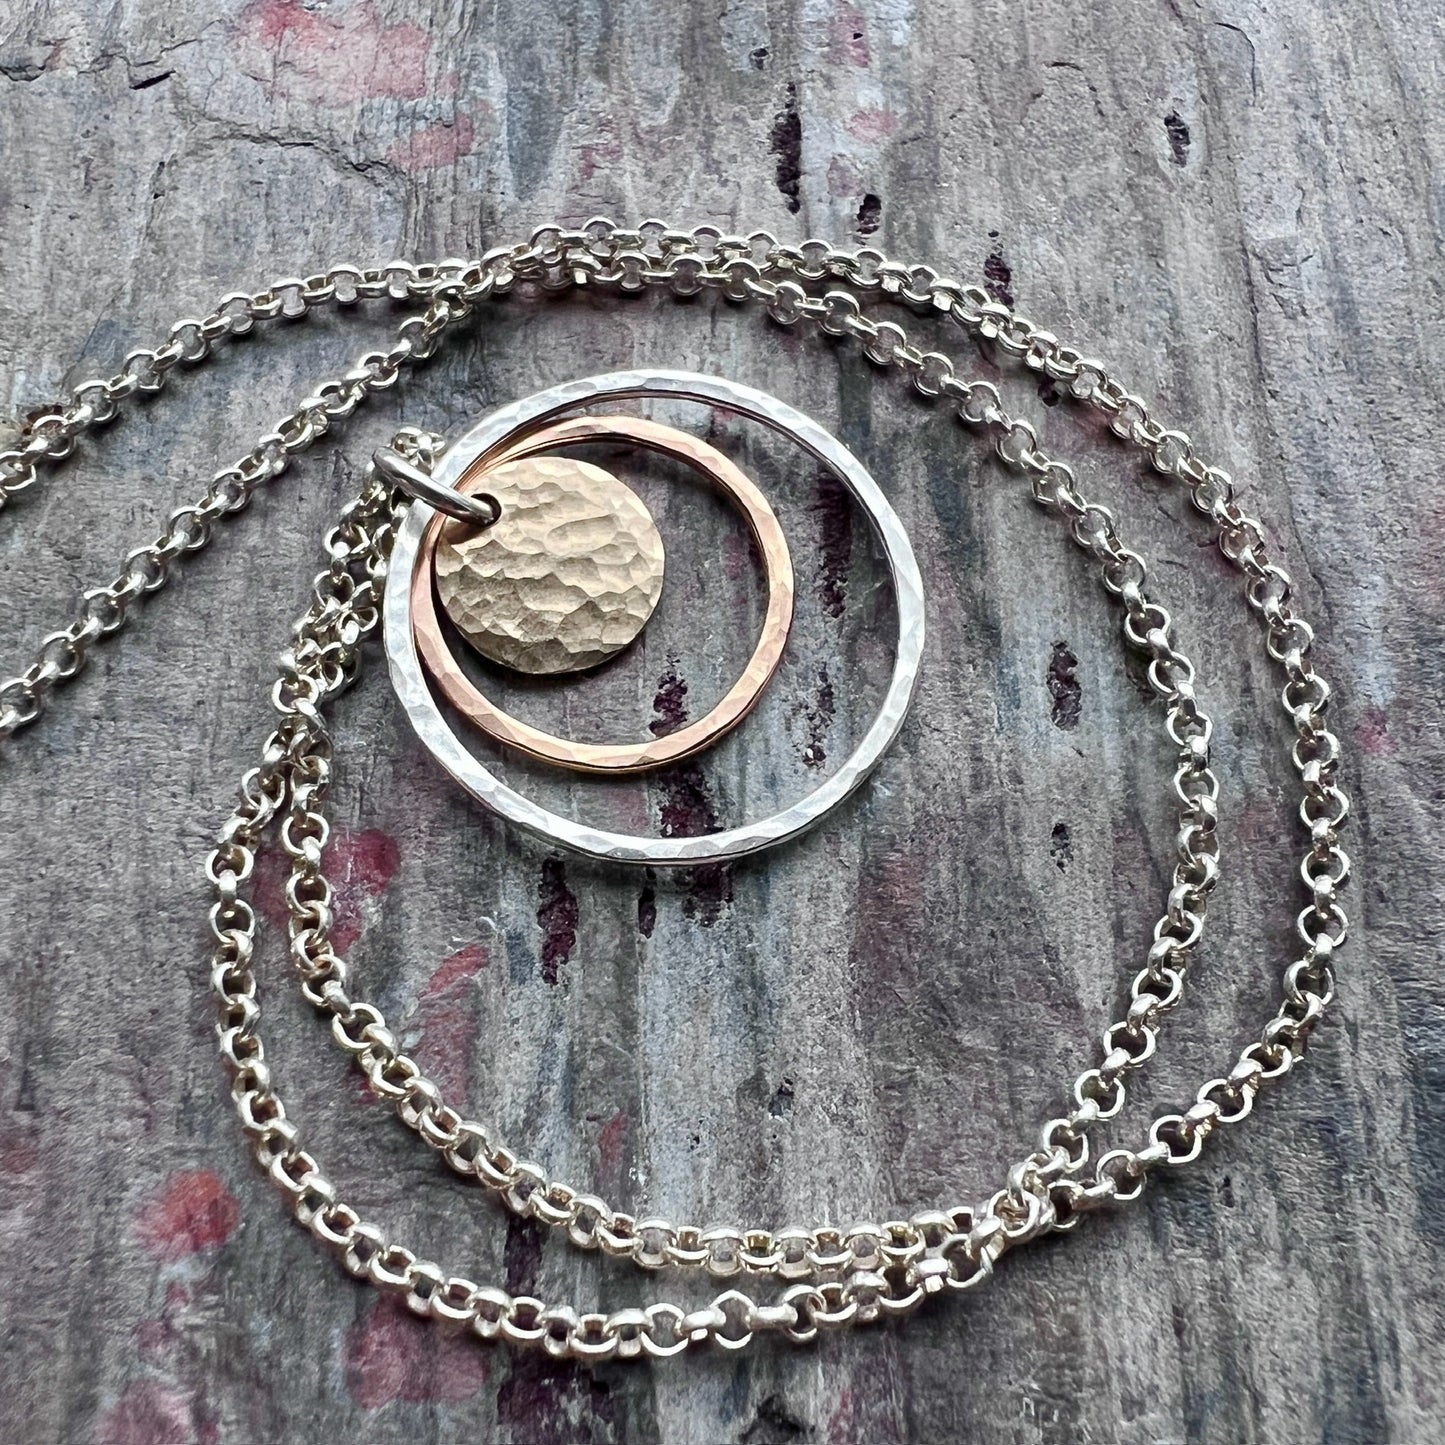 14k Goldfill and Sterling Silver Necklace | Mixed Metal Hammered Gold and Silver Circles Pendant Necklace